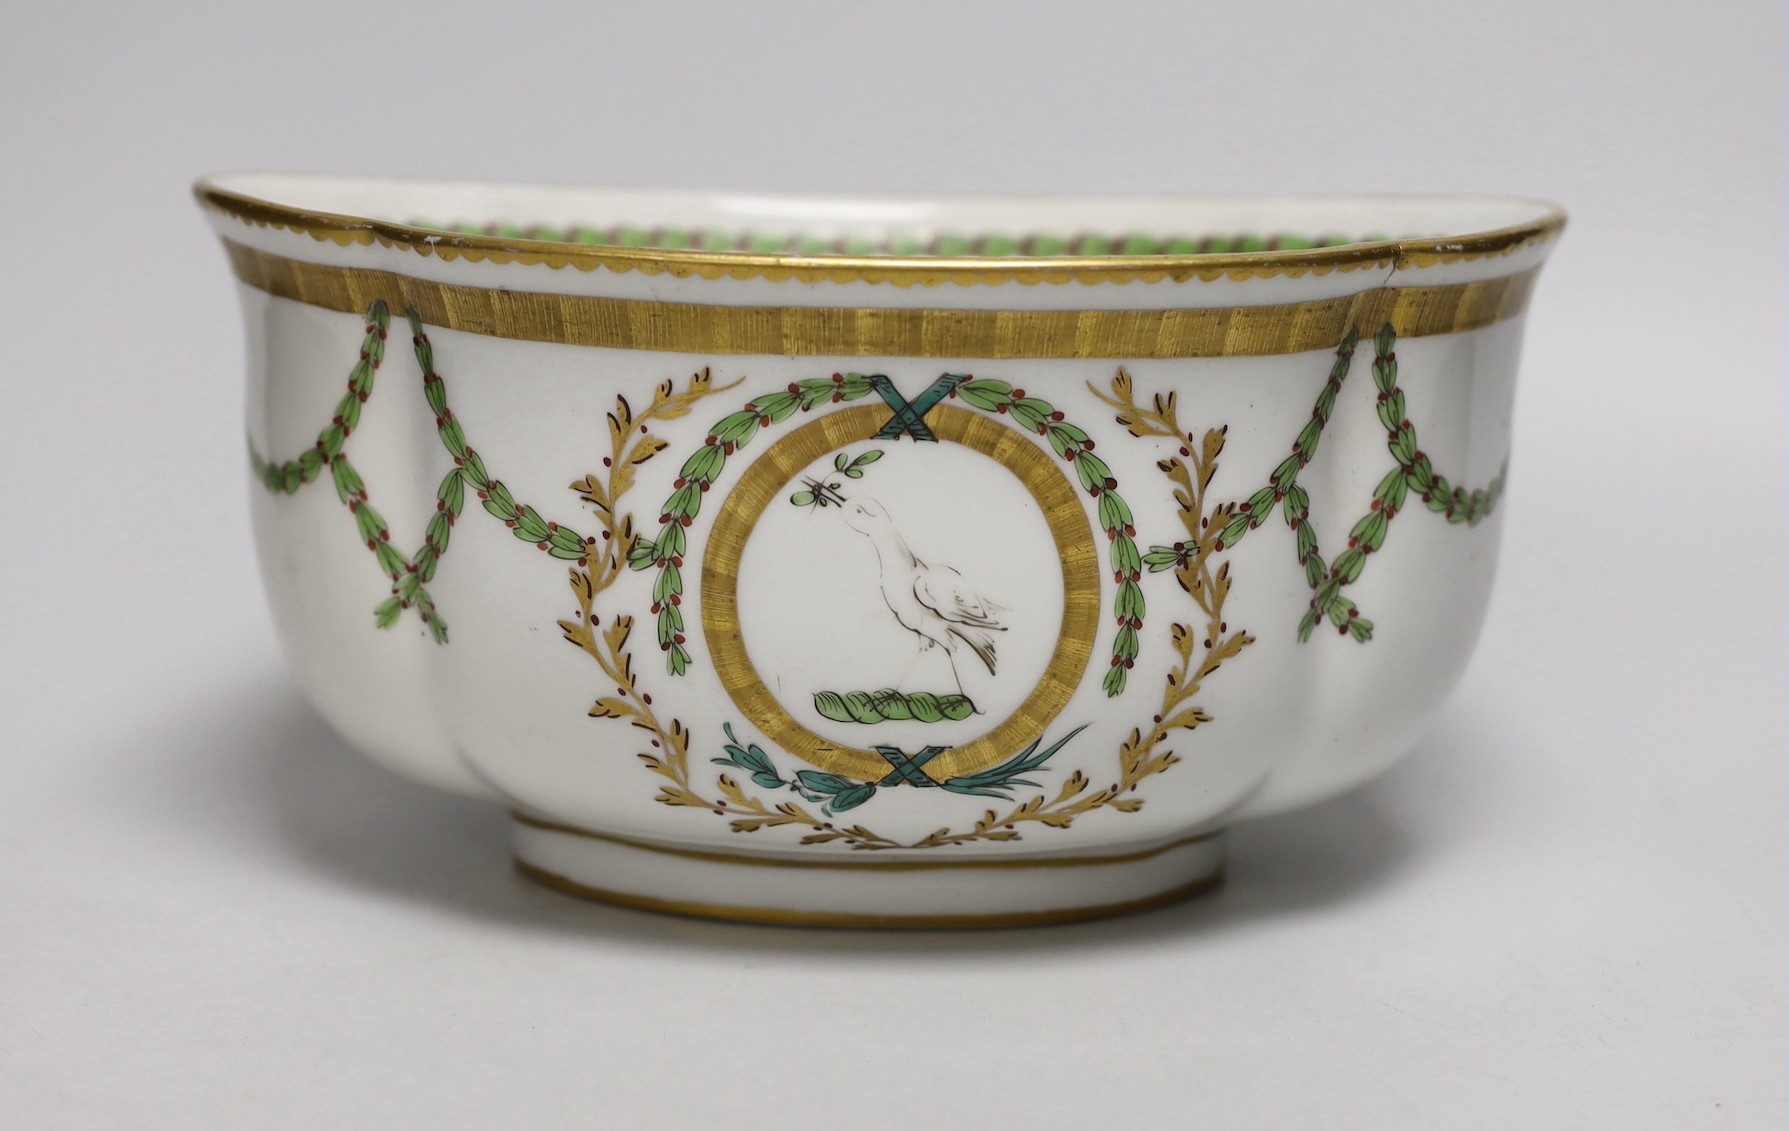 A 19th century porcelain bough pot of large size, painted in neo-classical style